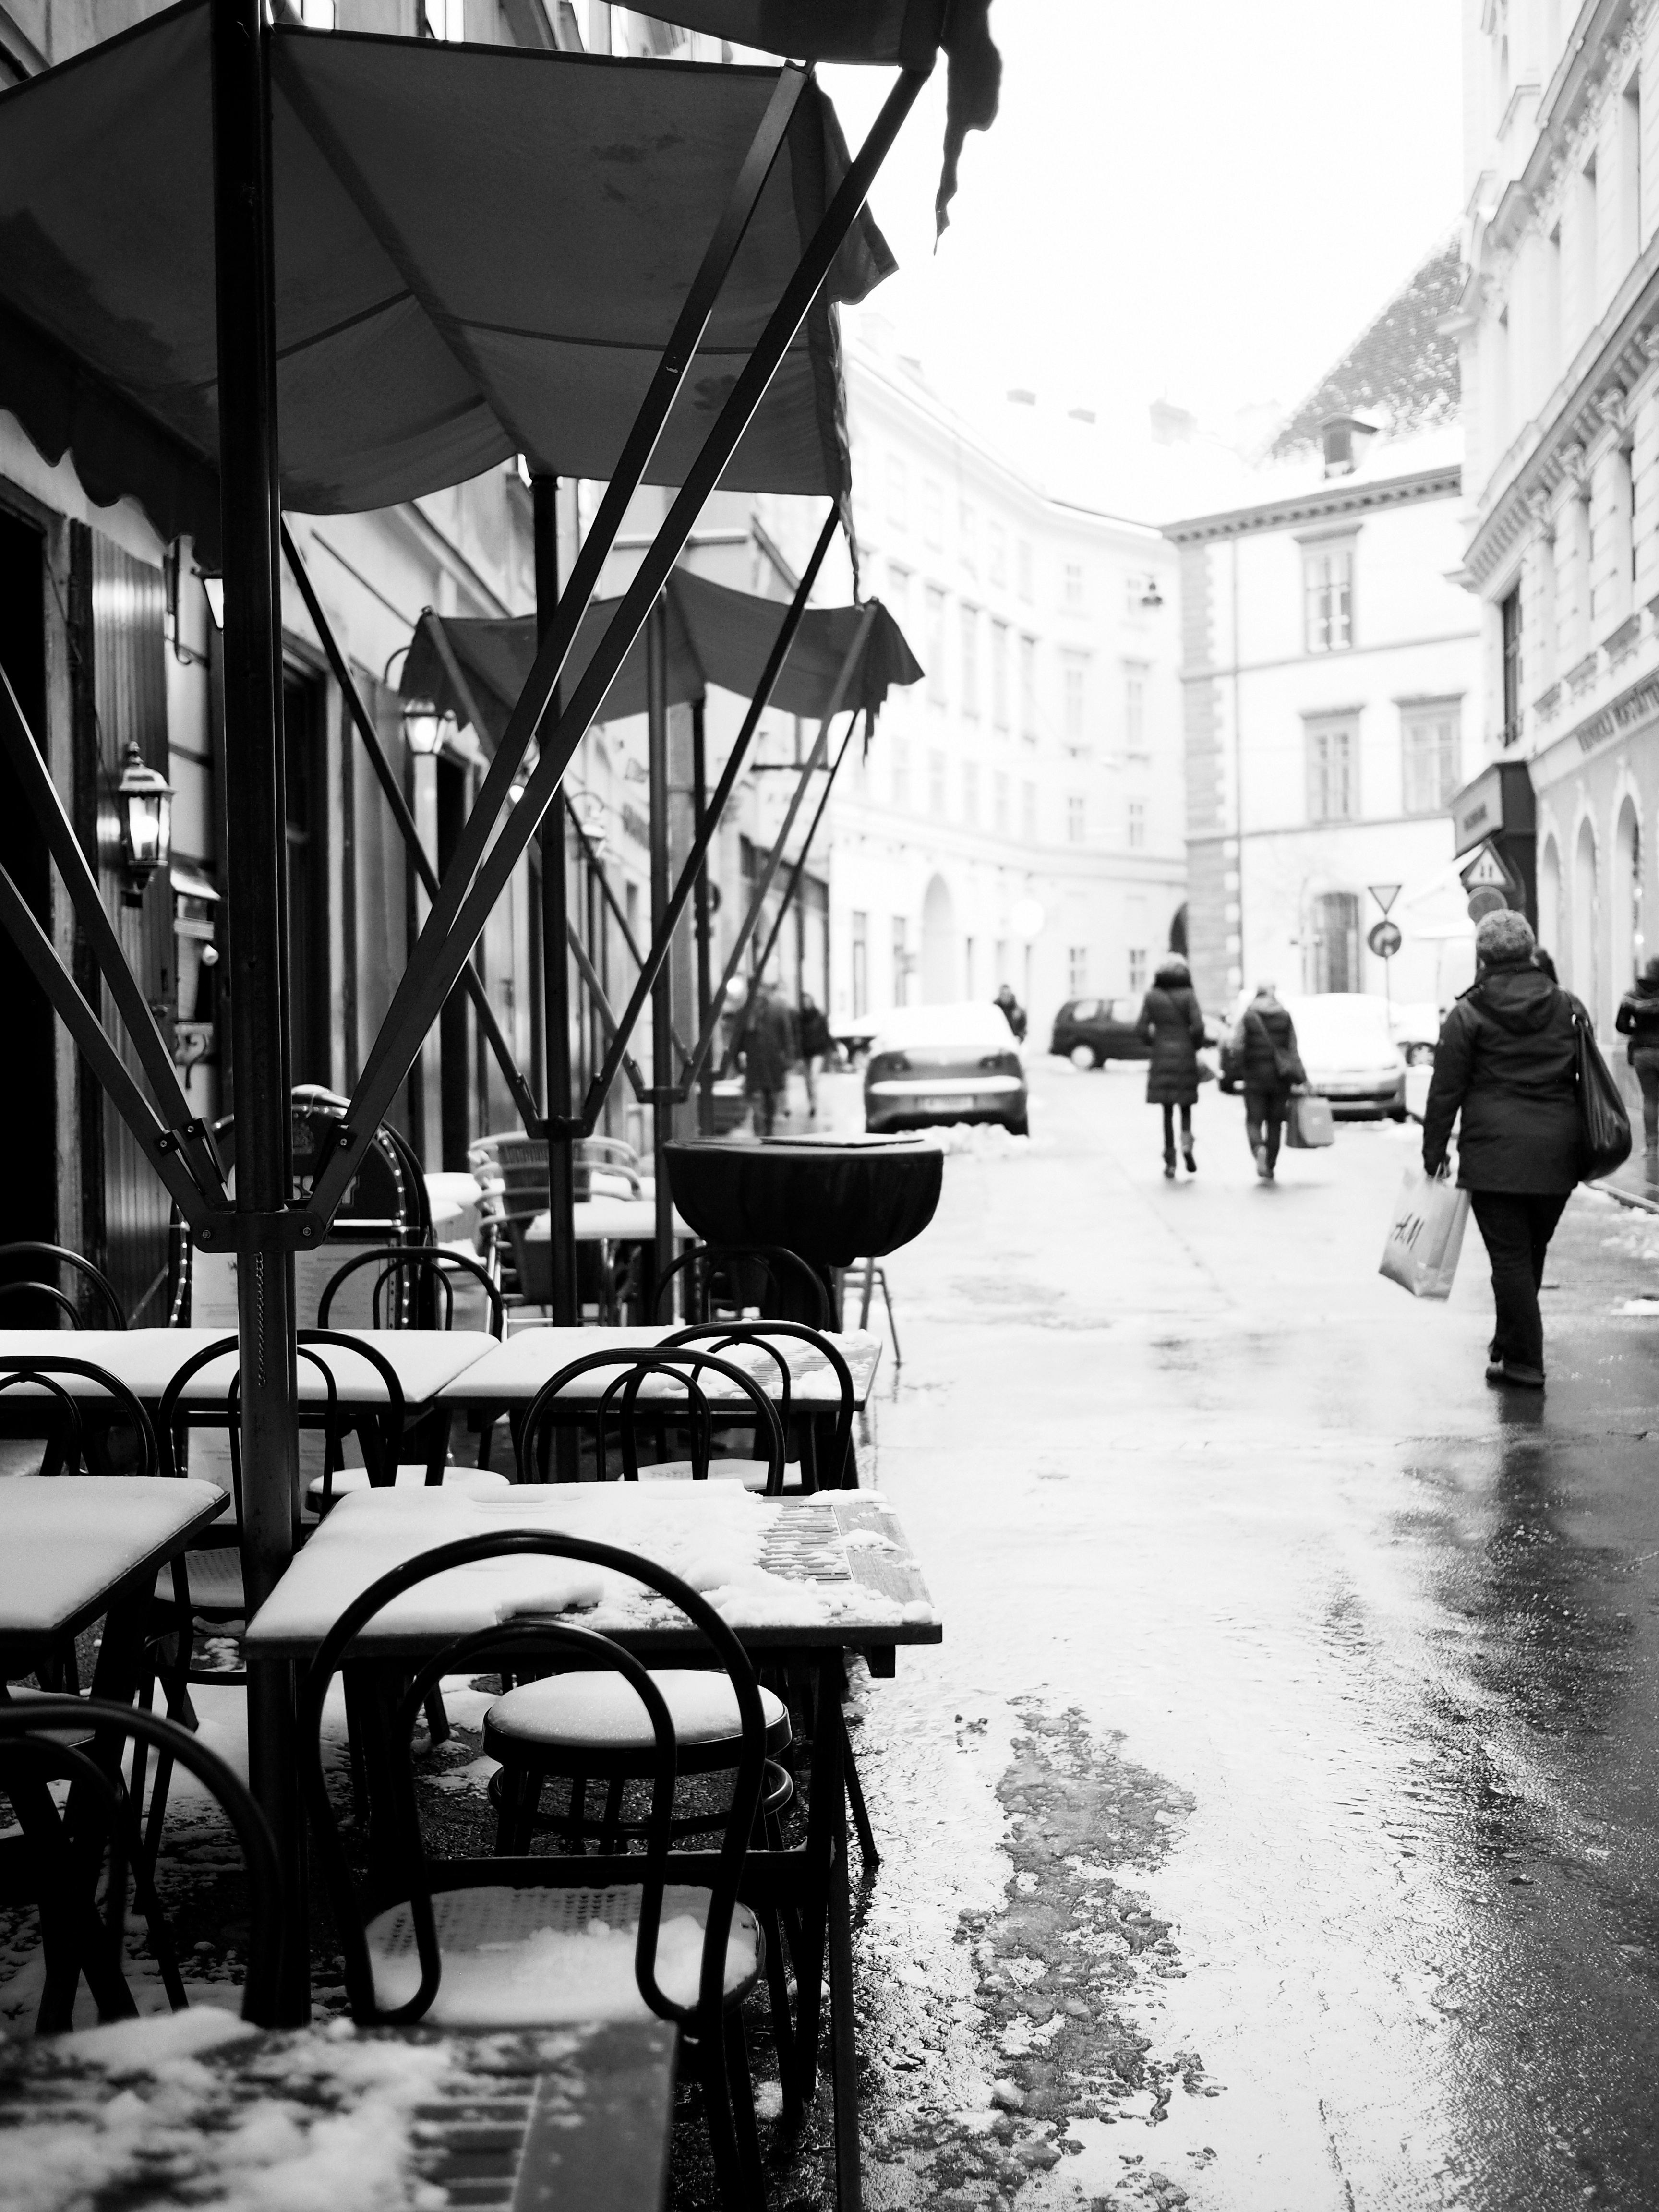 Snow Covered Cafe Seating in Vienna